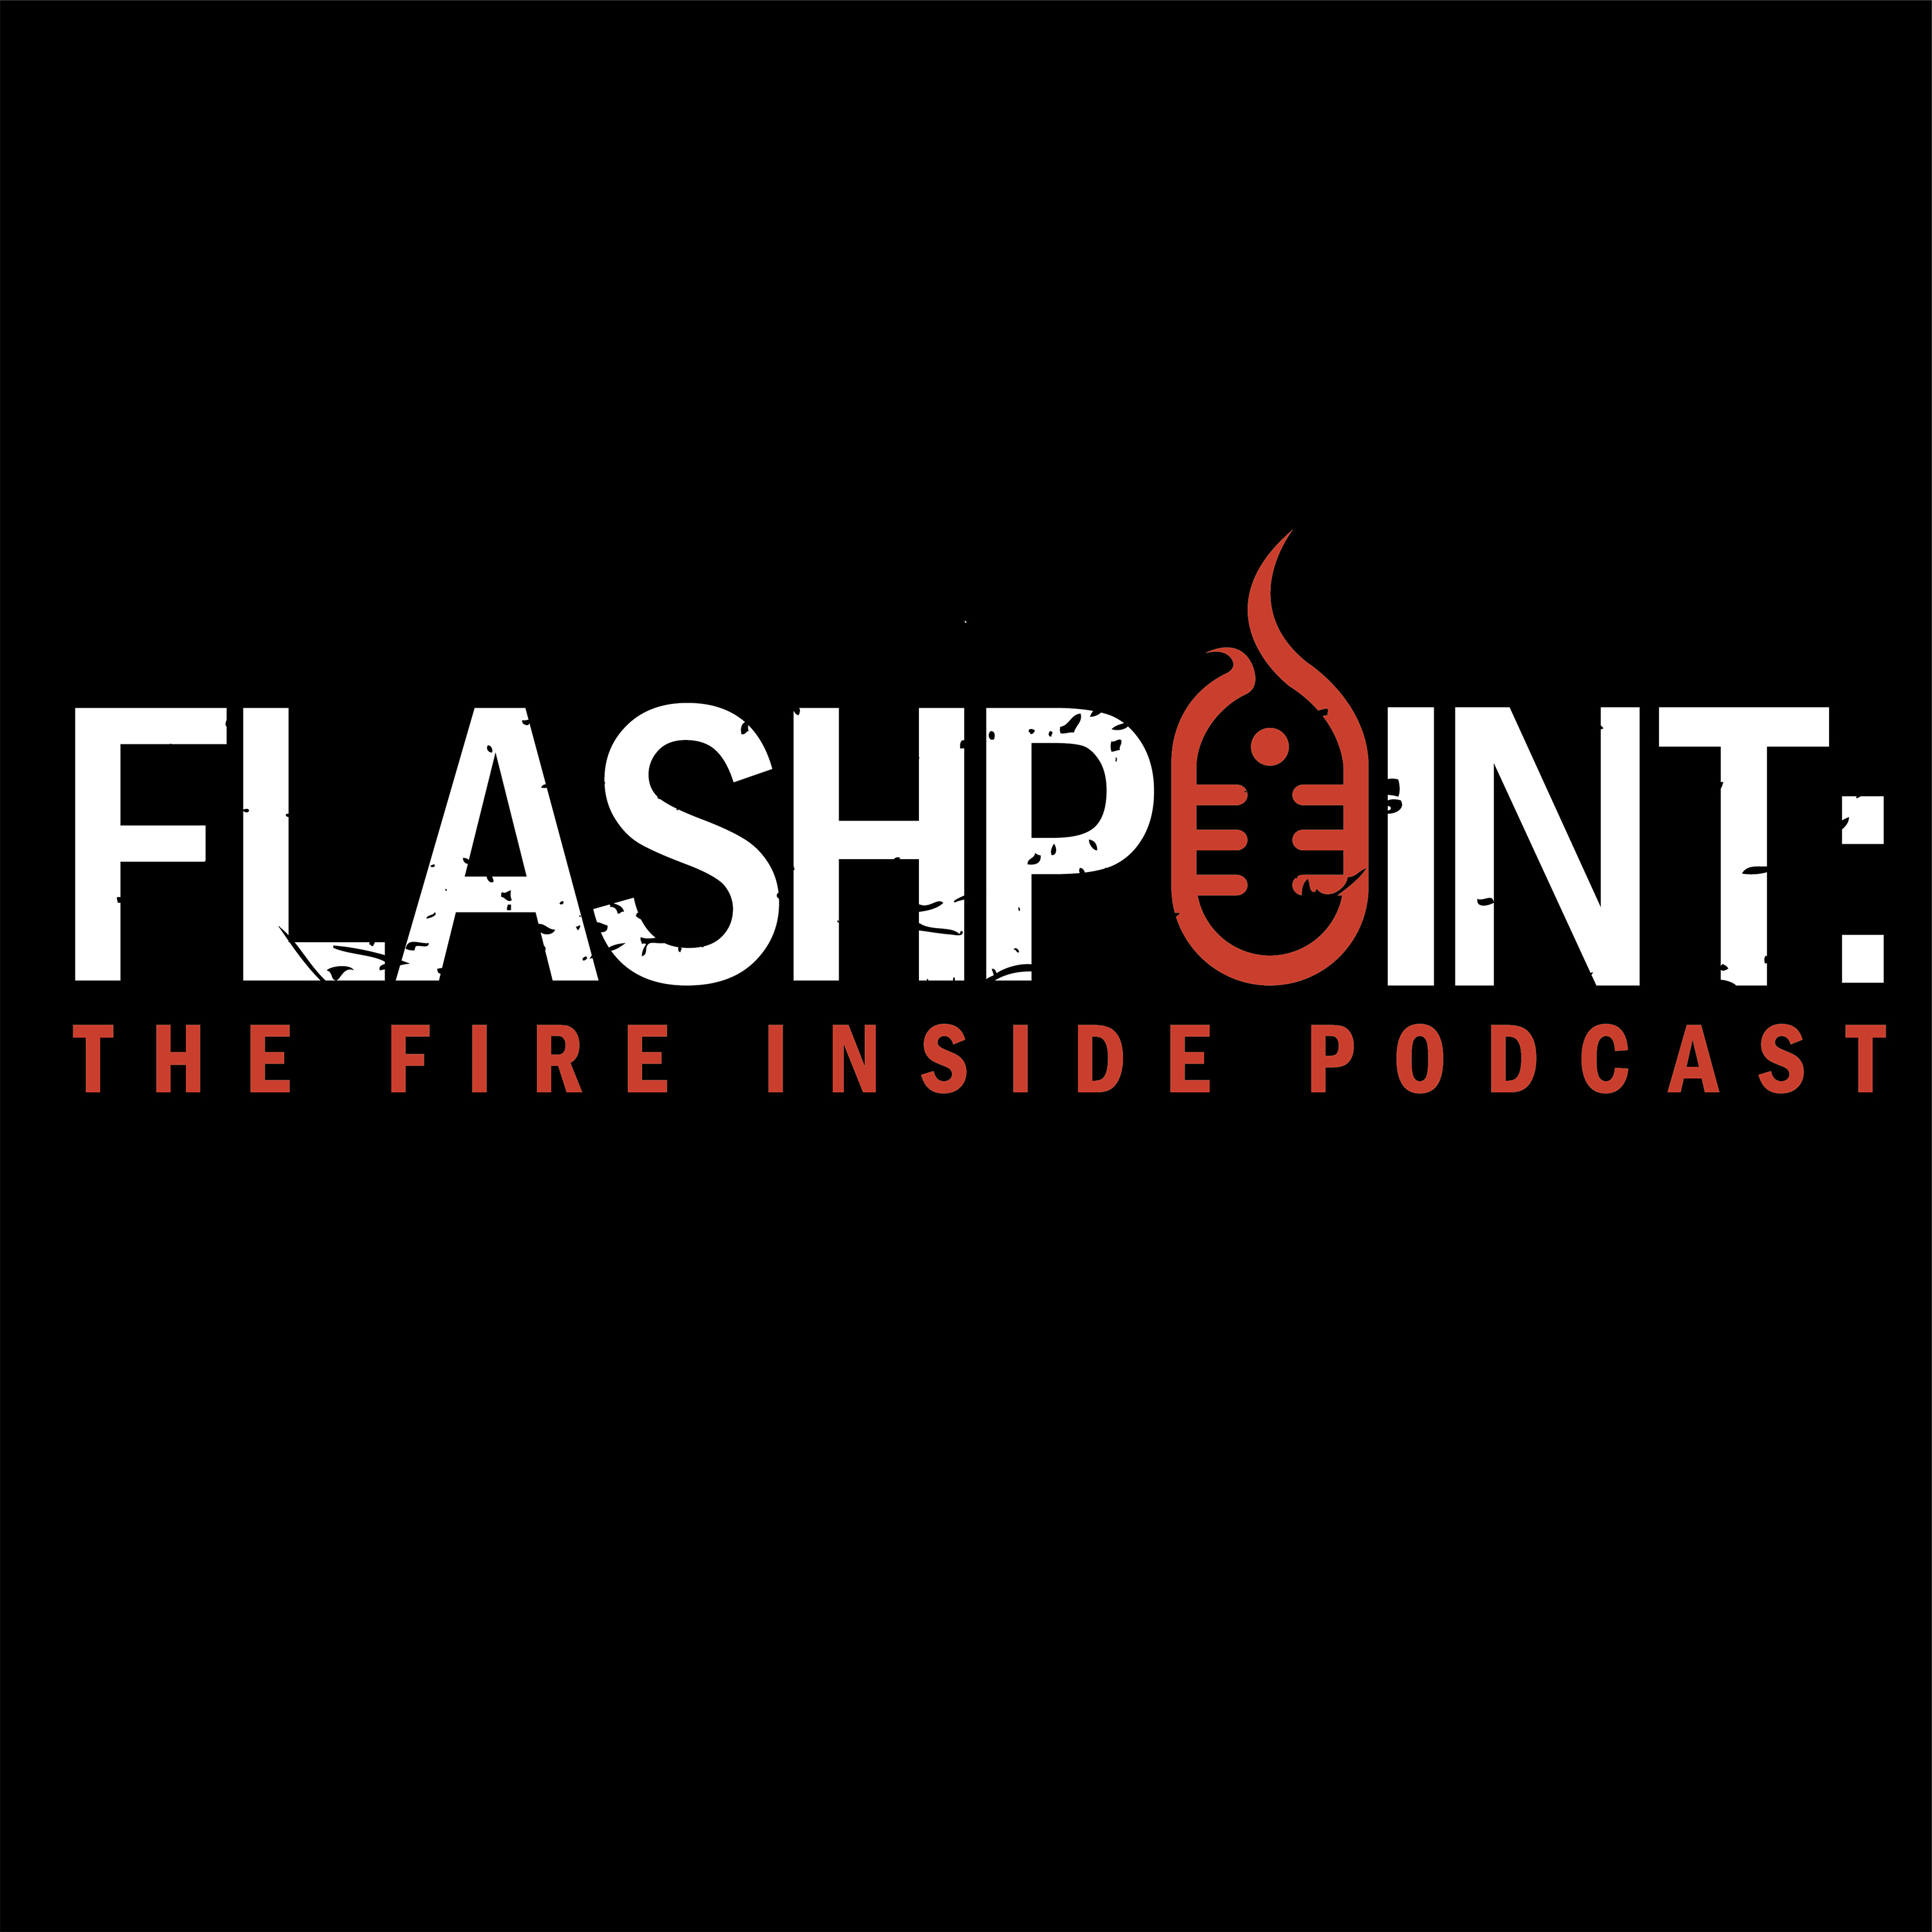 Flashpoint: The Fire Inside Podcast